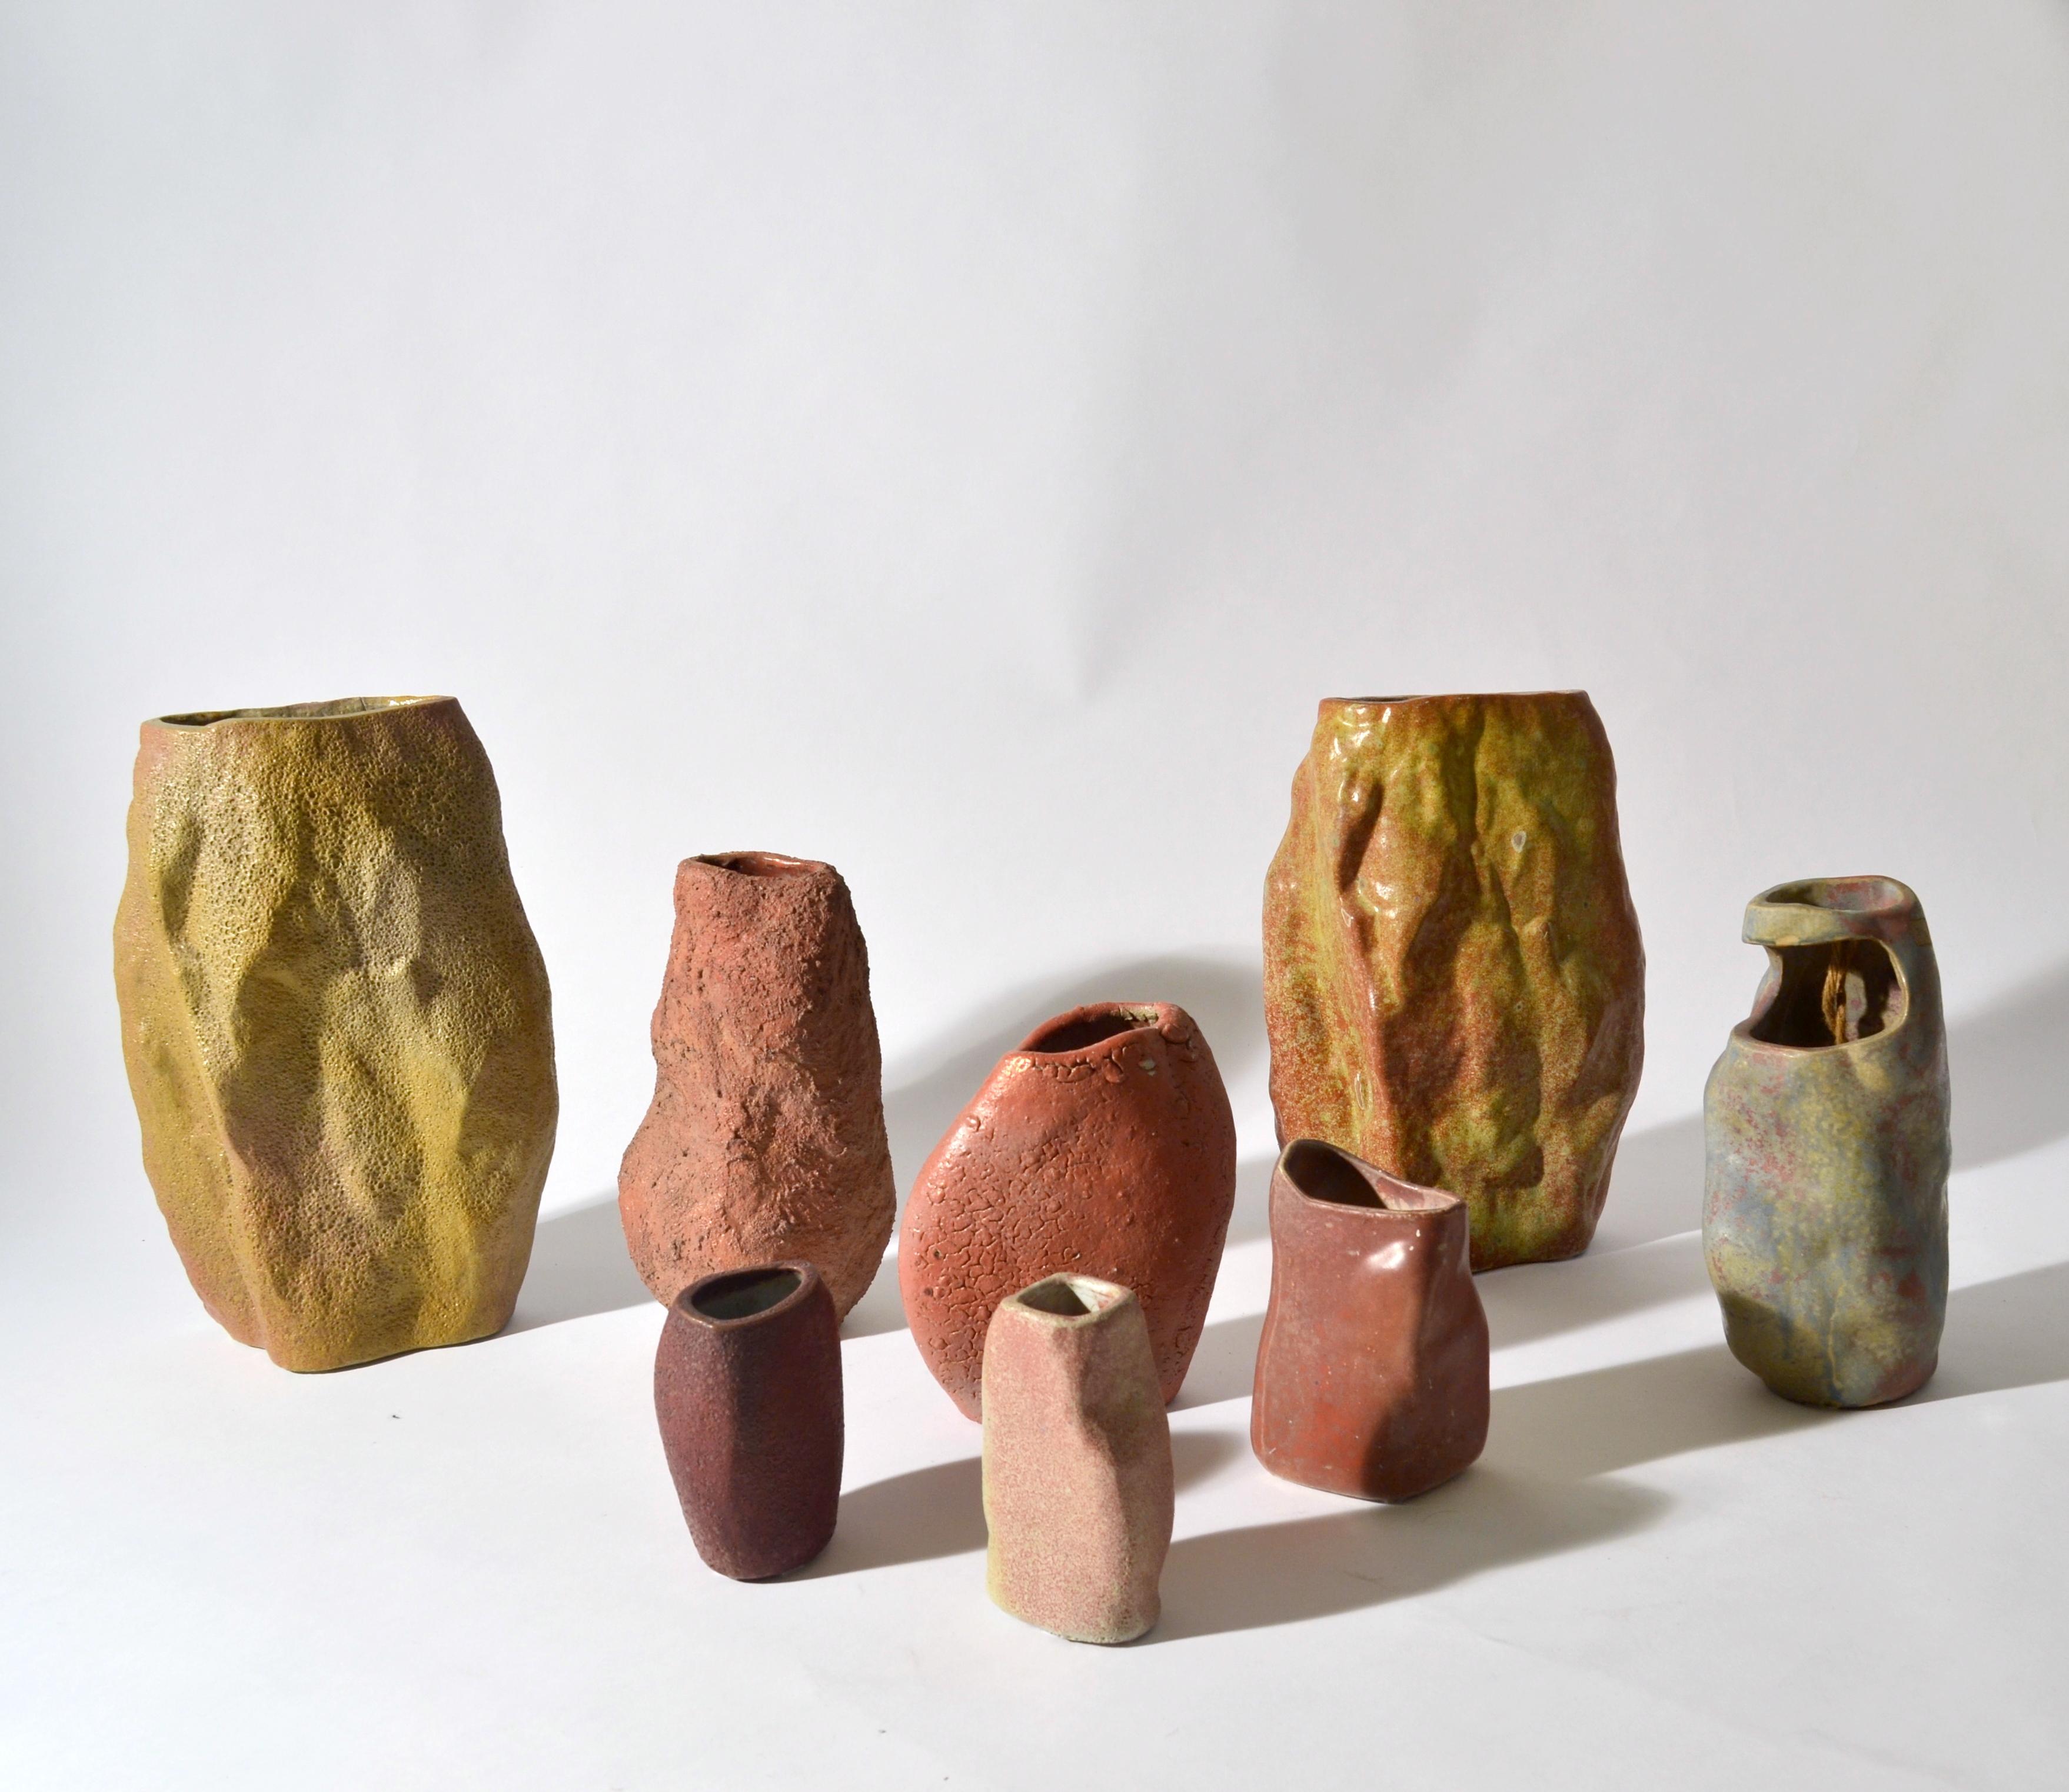 Group of eight rock shape Studio Pottery 1960s vases. They all have a unique appearance in shape, glaze colors and textures resembling the rock Formations in nature. It is a one-of-a-kind collection. They are purchased from the family of the